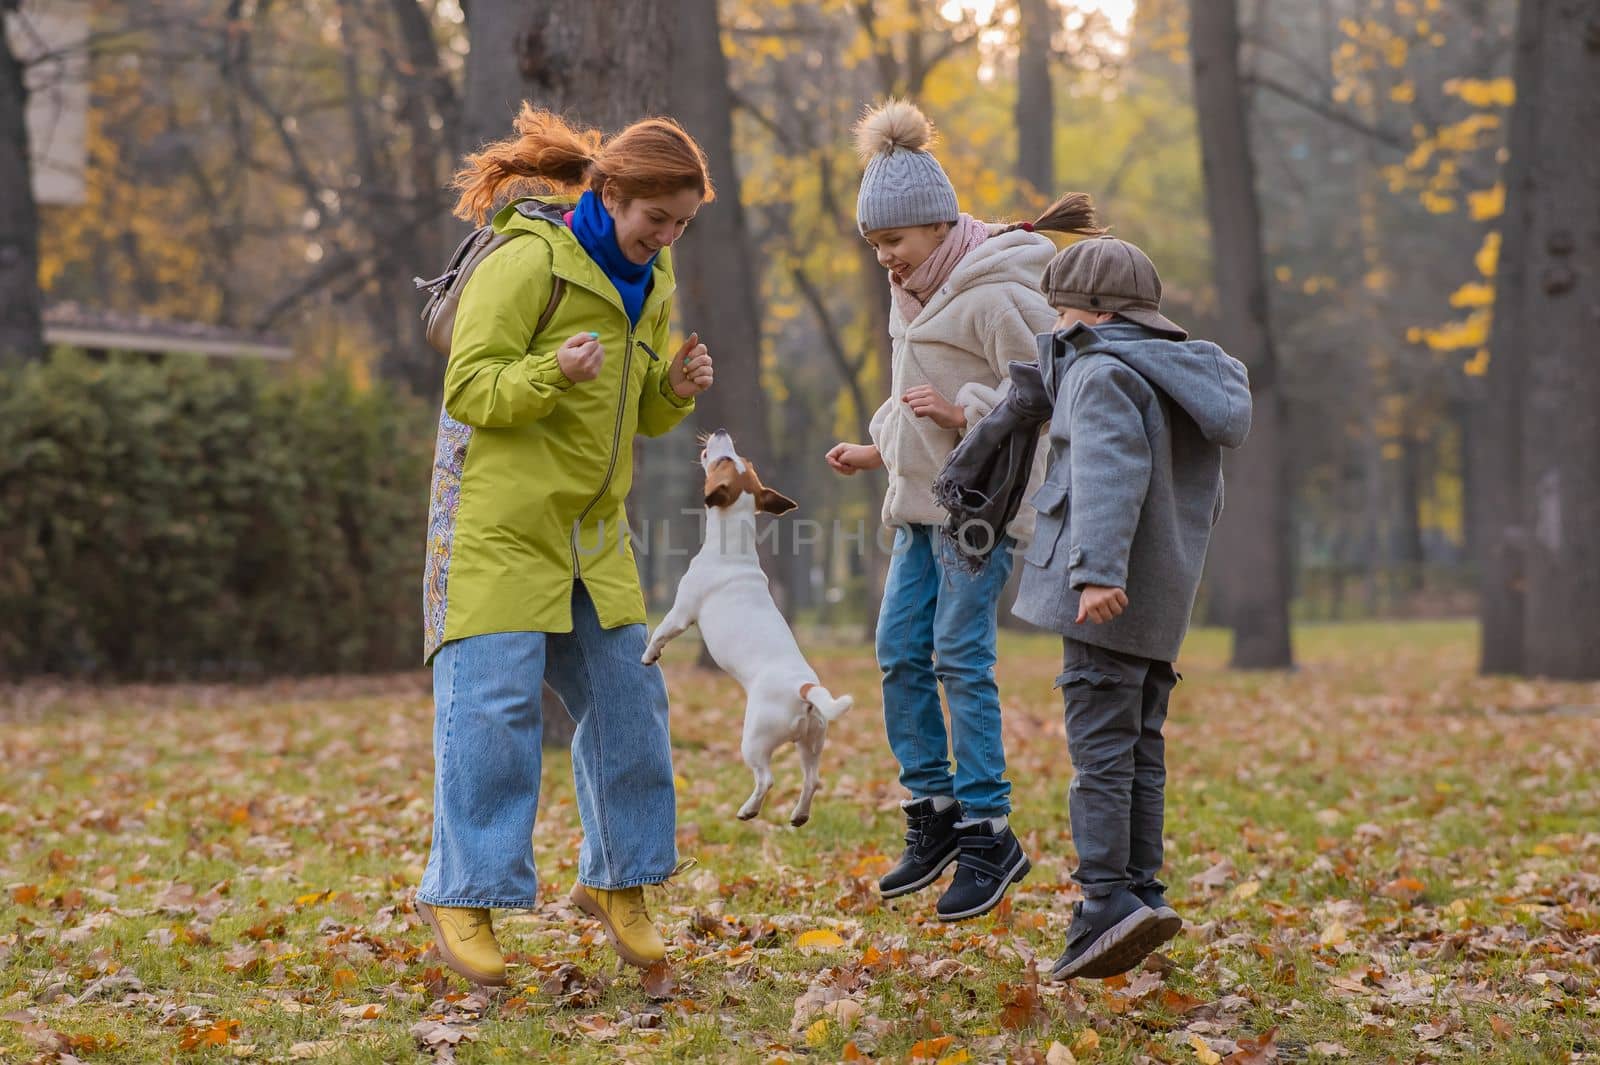 Caucasian children and red-haired woman play with dog jack russell terrier in autumn park